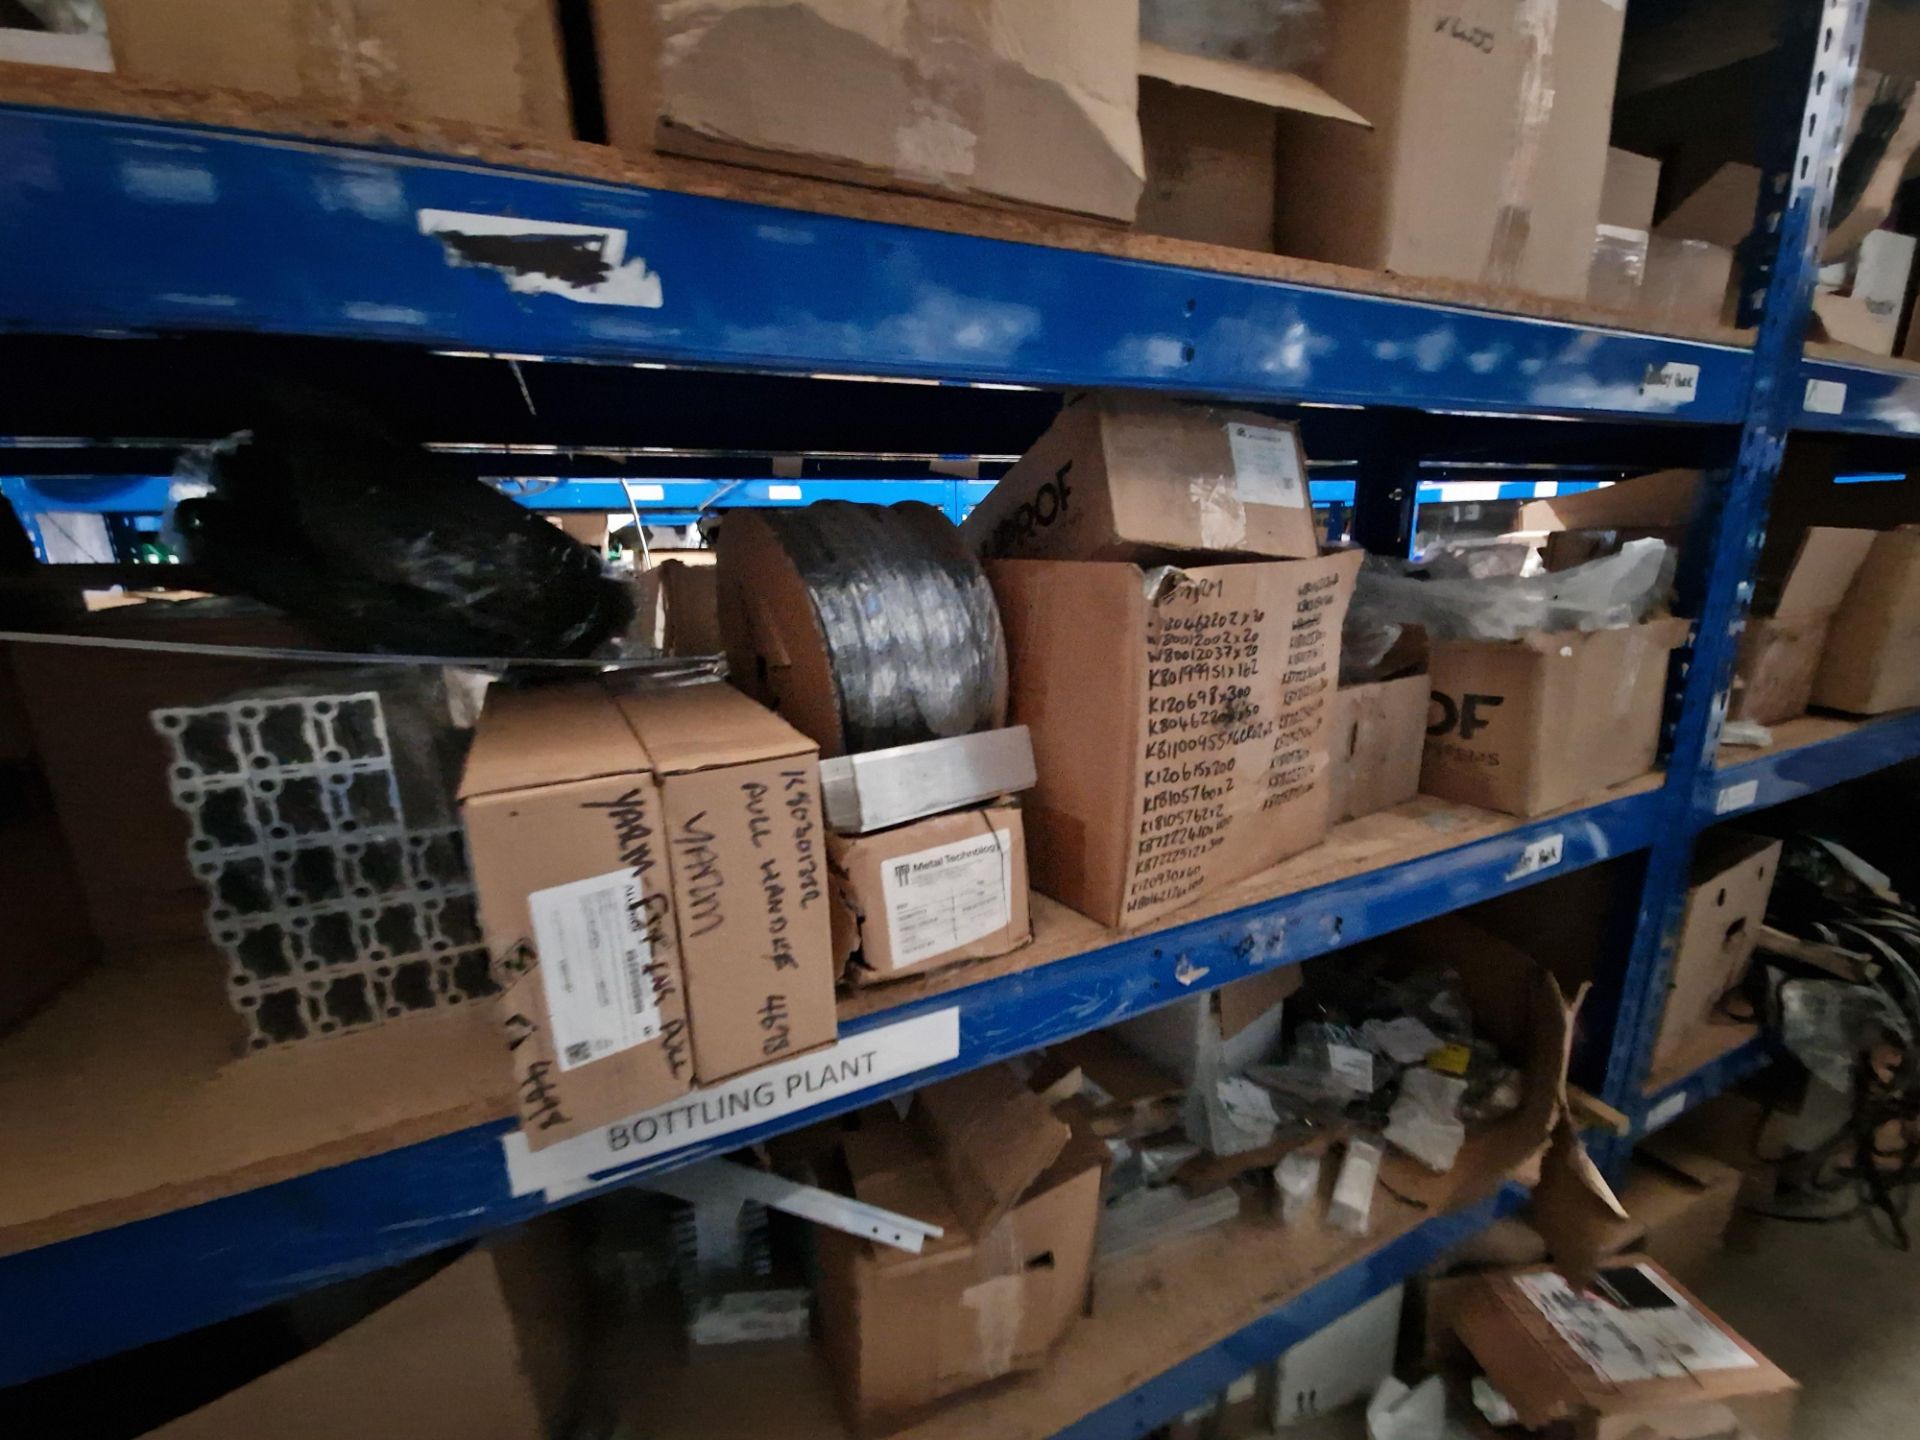 Contents to Four Bays of Shelving, including Rubber Gaskets, Aluminium Profile, End Caps, Screws, - Image 11 of 13